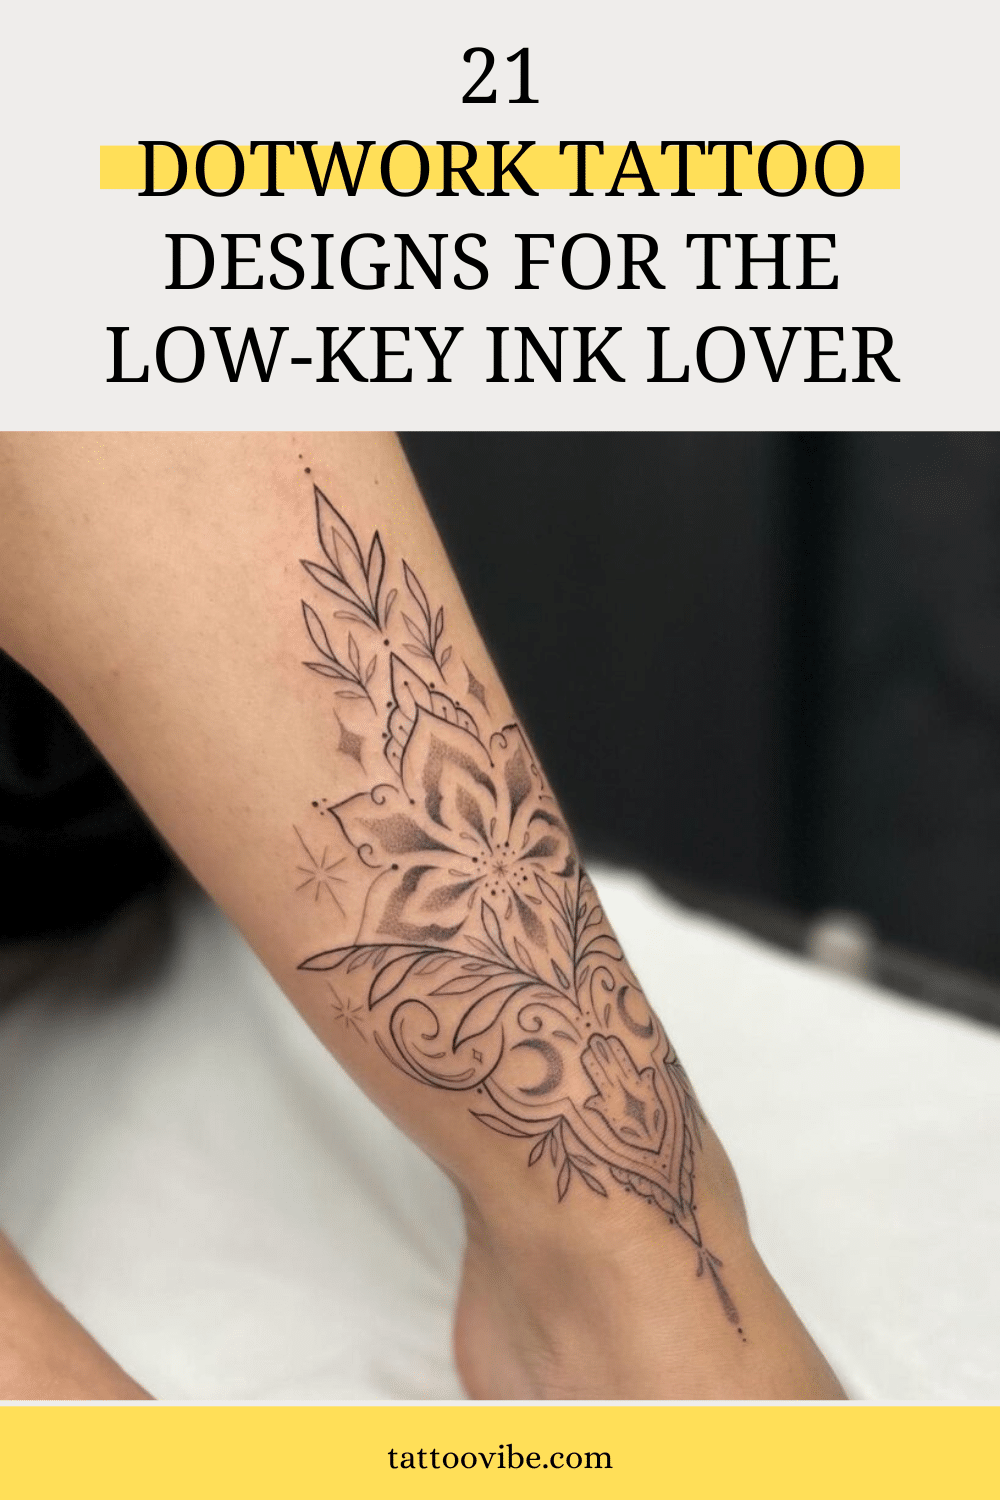 21 Dotwork Tattoo Designs For The Low-Key Ink Lover